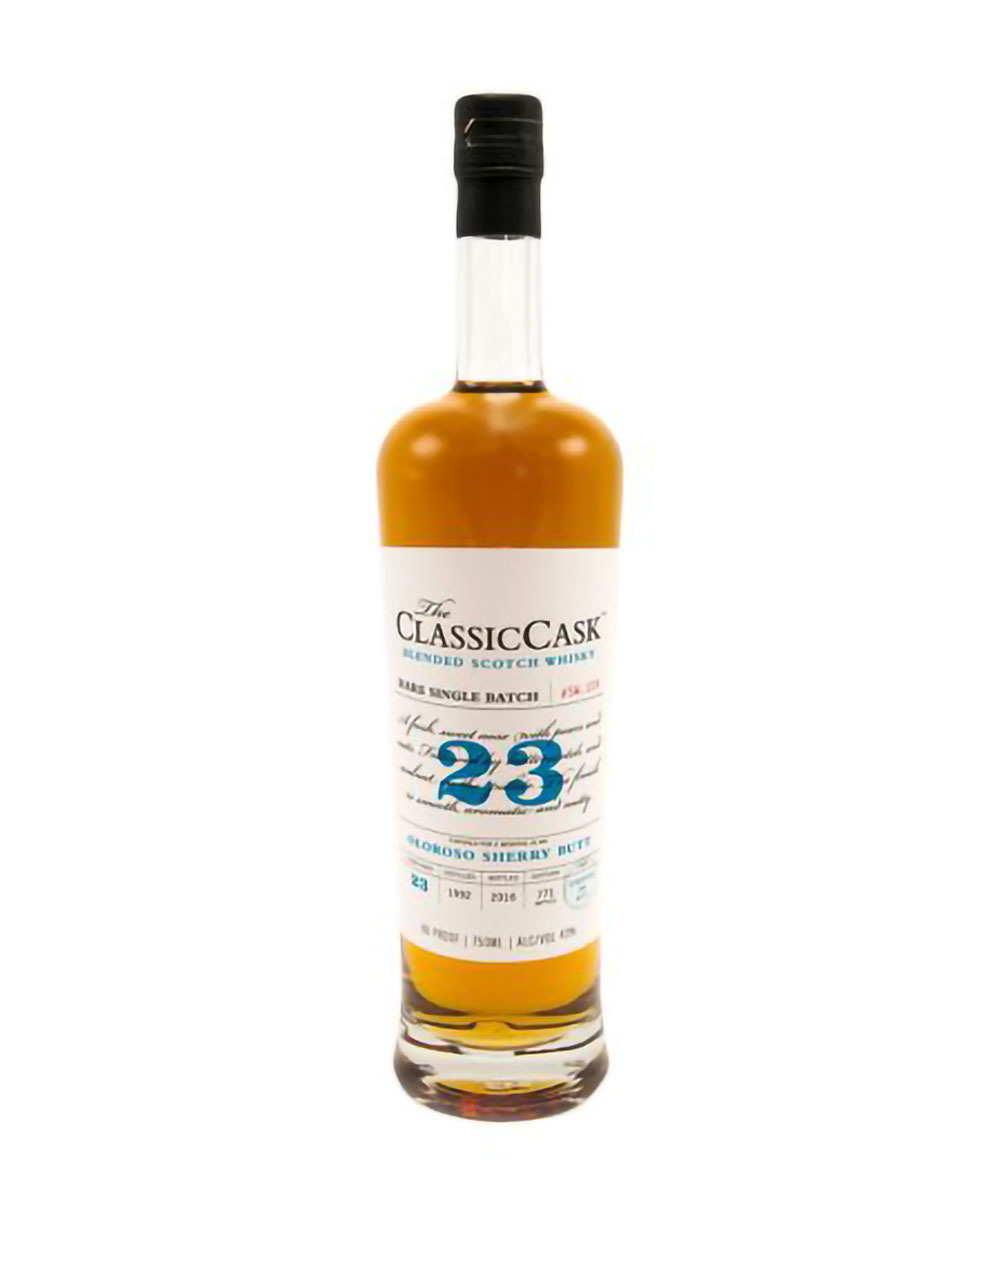 The Classic Cask 23 Year Old Oloroso Sherry Finish Blended Scotch Whisky